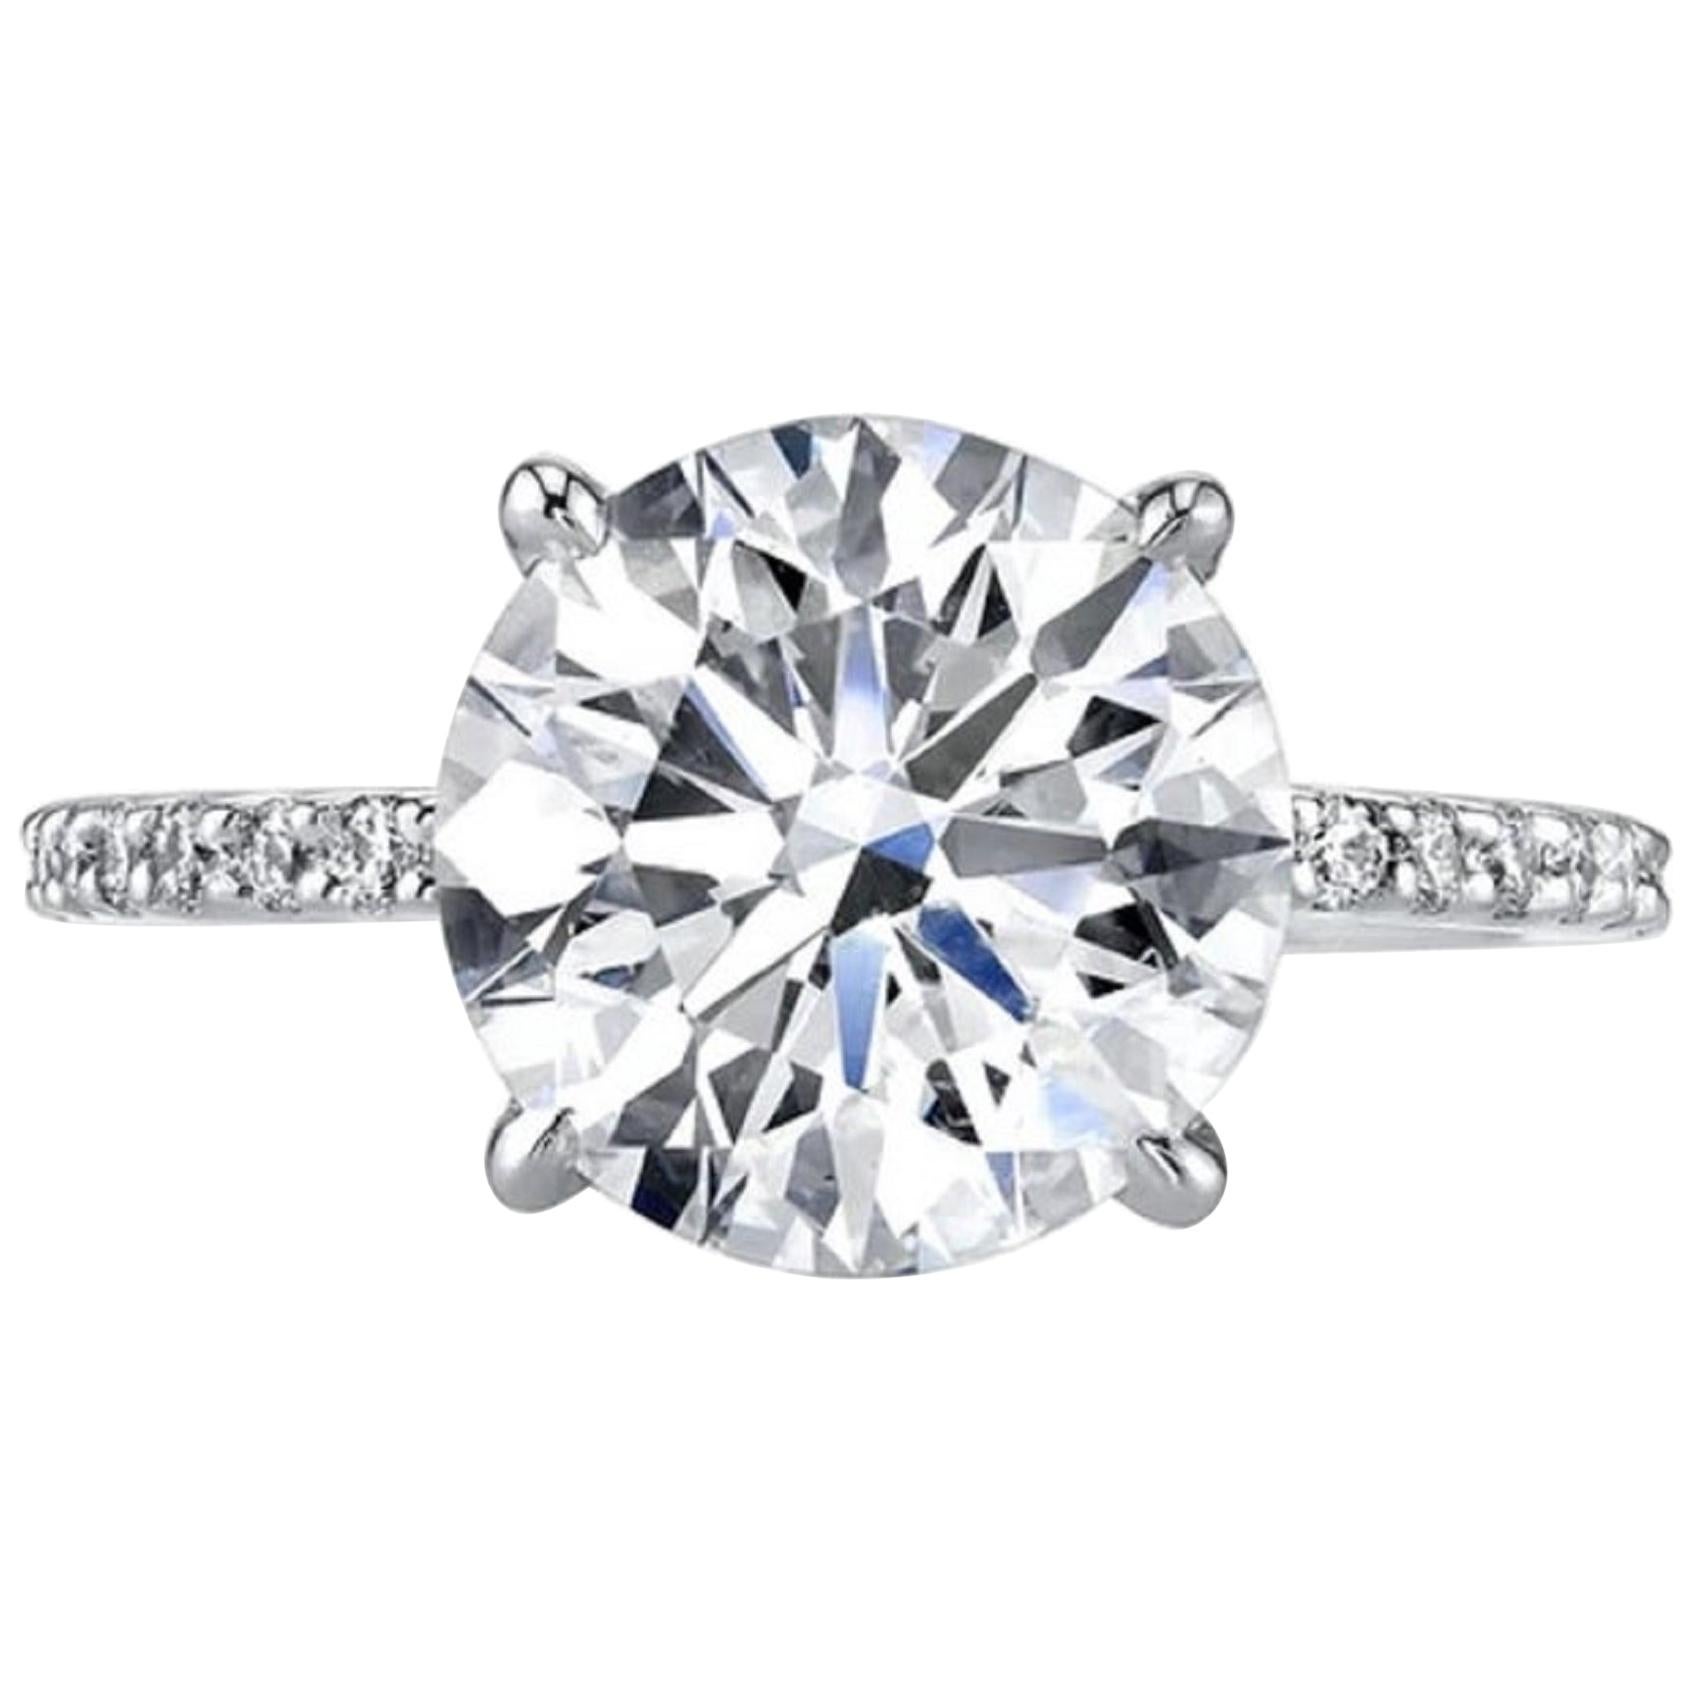 An amazing diamond ring with a beautiful 3.25 carat round brilliant cut diamond plus a delicate pave of round brilliant cut diamonds all vs1  in clarity and d color 